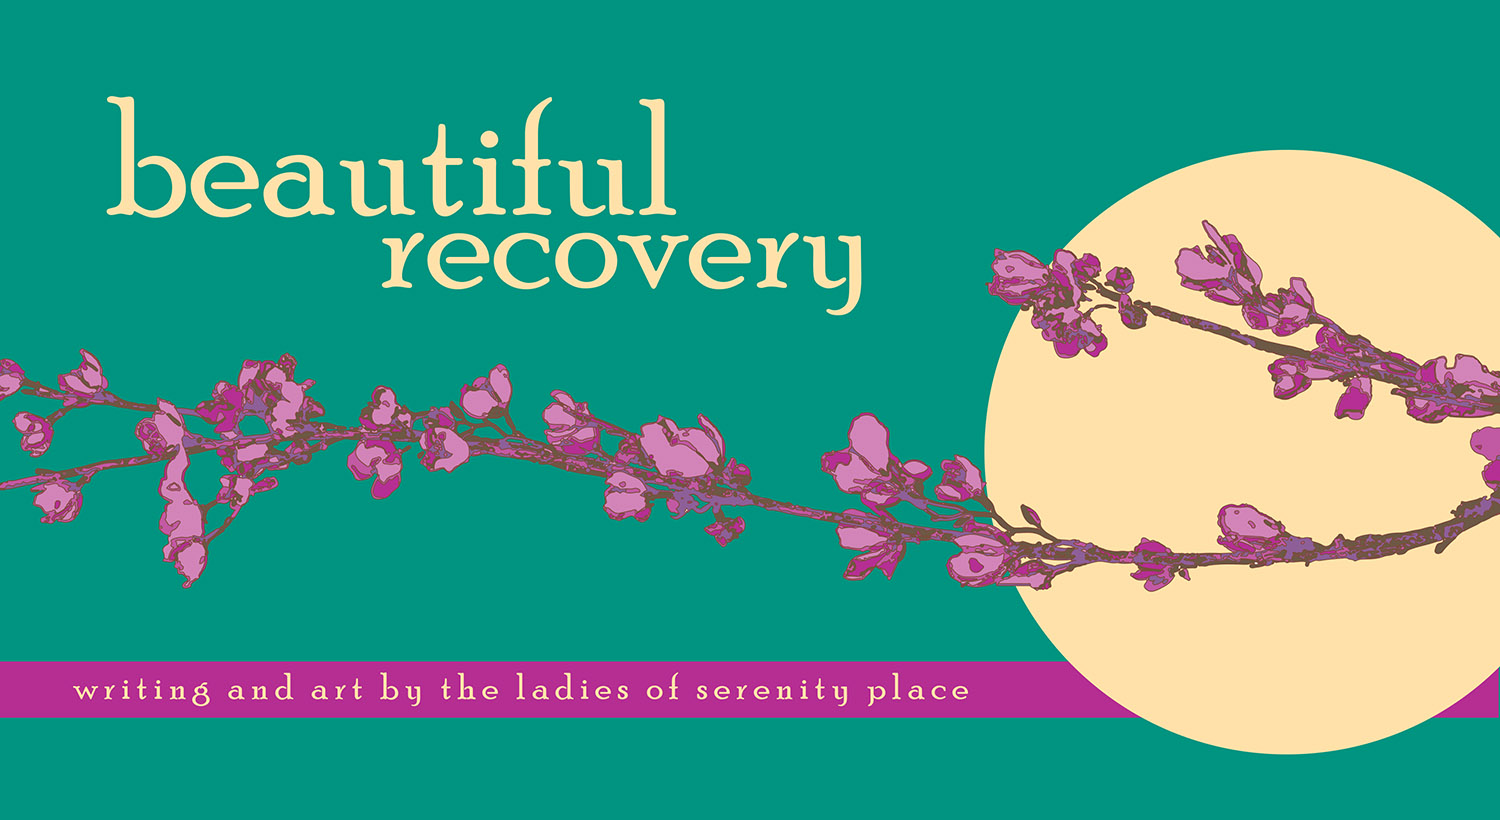 The Applied Theatre Center partnered with Serenity Place in 2018 to produce "Beautiful Recovery", which featured writing and art by Serenity Place residents, as well as professional studio photographs of the writers and artists.